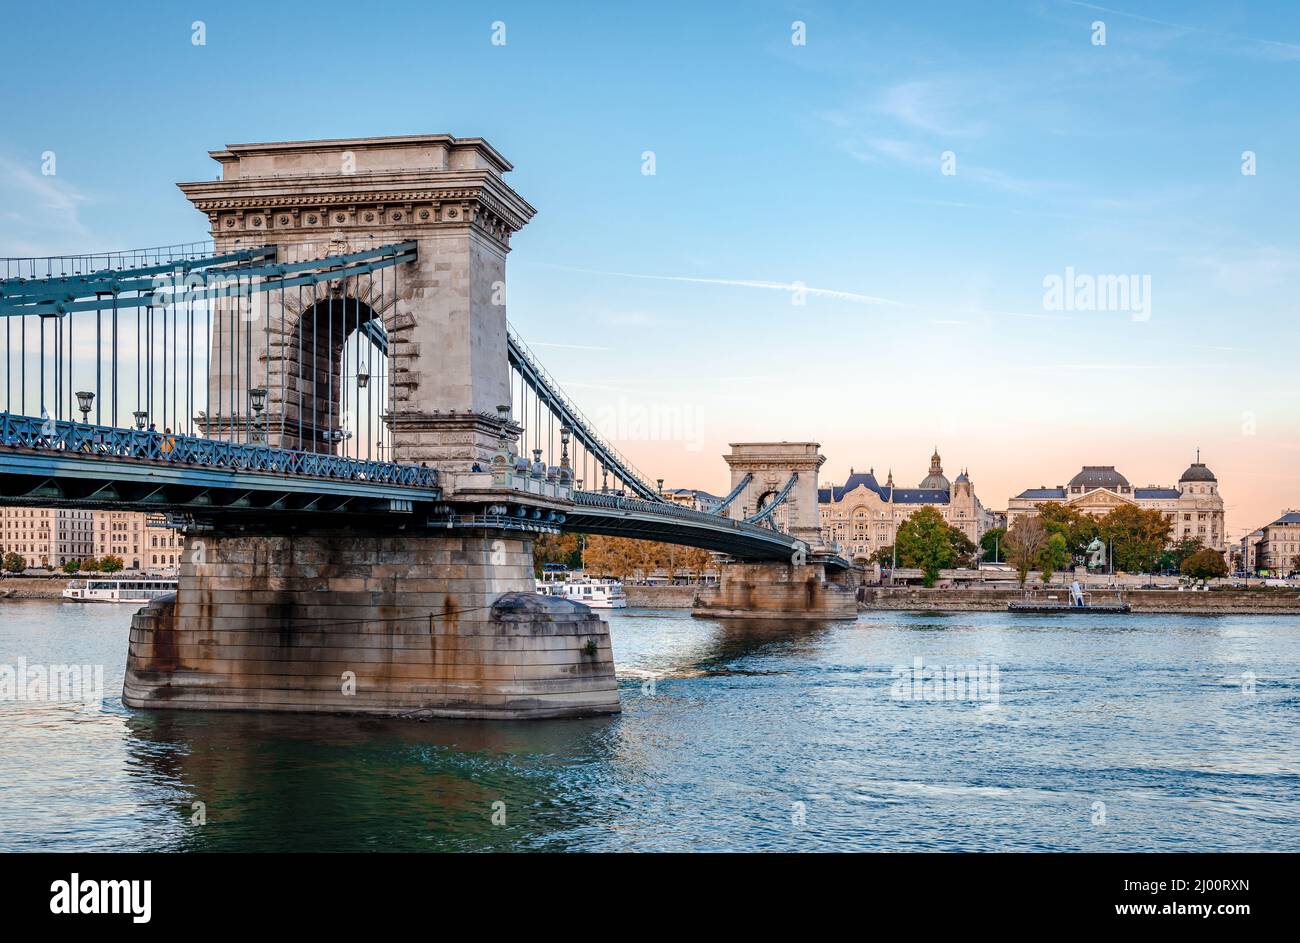 Budapest, Hungary - October 4 2018: Sunset with the Chain Bridge and with Pest, the eastern side of the city, in the background. Stock Photo